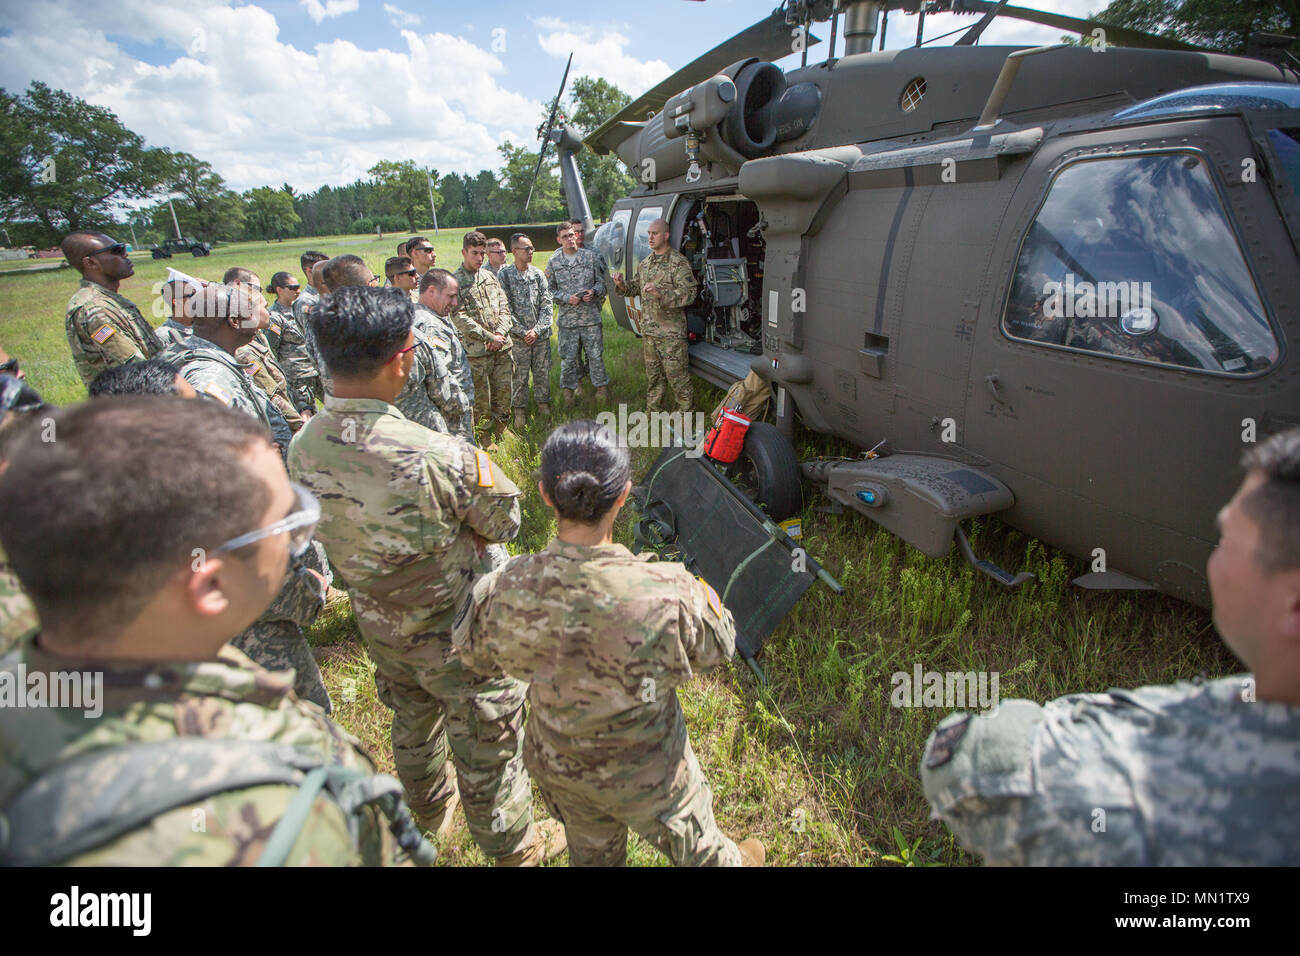 U.S. Army Reserve Sgt. Juan Rodriguez, 7158 Aviation Company, instructs U.S. Army Reserve Soldiers from the 328th Combat Support Hospital (CSH) and 349th CSH about how to properly approach a UH-60 Blackhawk helicopter during Combat Support Training Exercise (CSTX) 86-17-02 at Fort McCoy, Wis., August 10, 2017. CSTX includes more than 12,000 service members from the Army, Navy, Air Force and Marine Corps as well as from six countries. CSTX is a large-scale training event where units experience tactical training scenarios specifically designed to replicate real-world missions. (U.S. Army Reserve Stock Photo